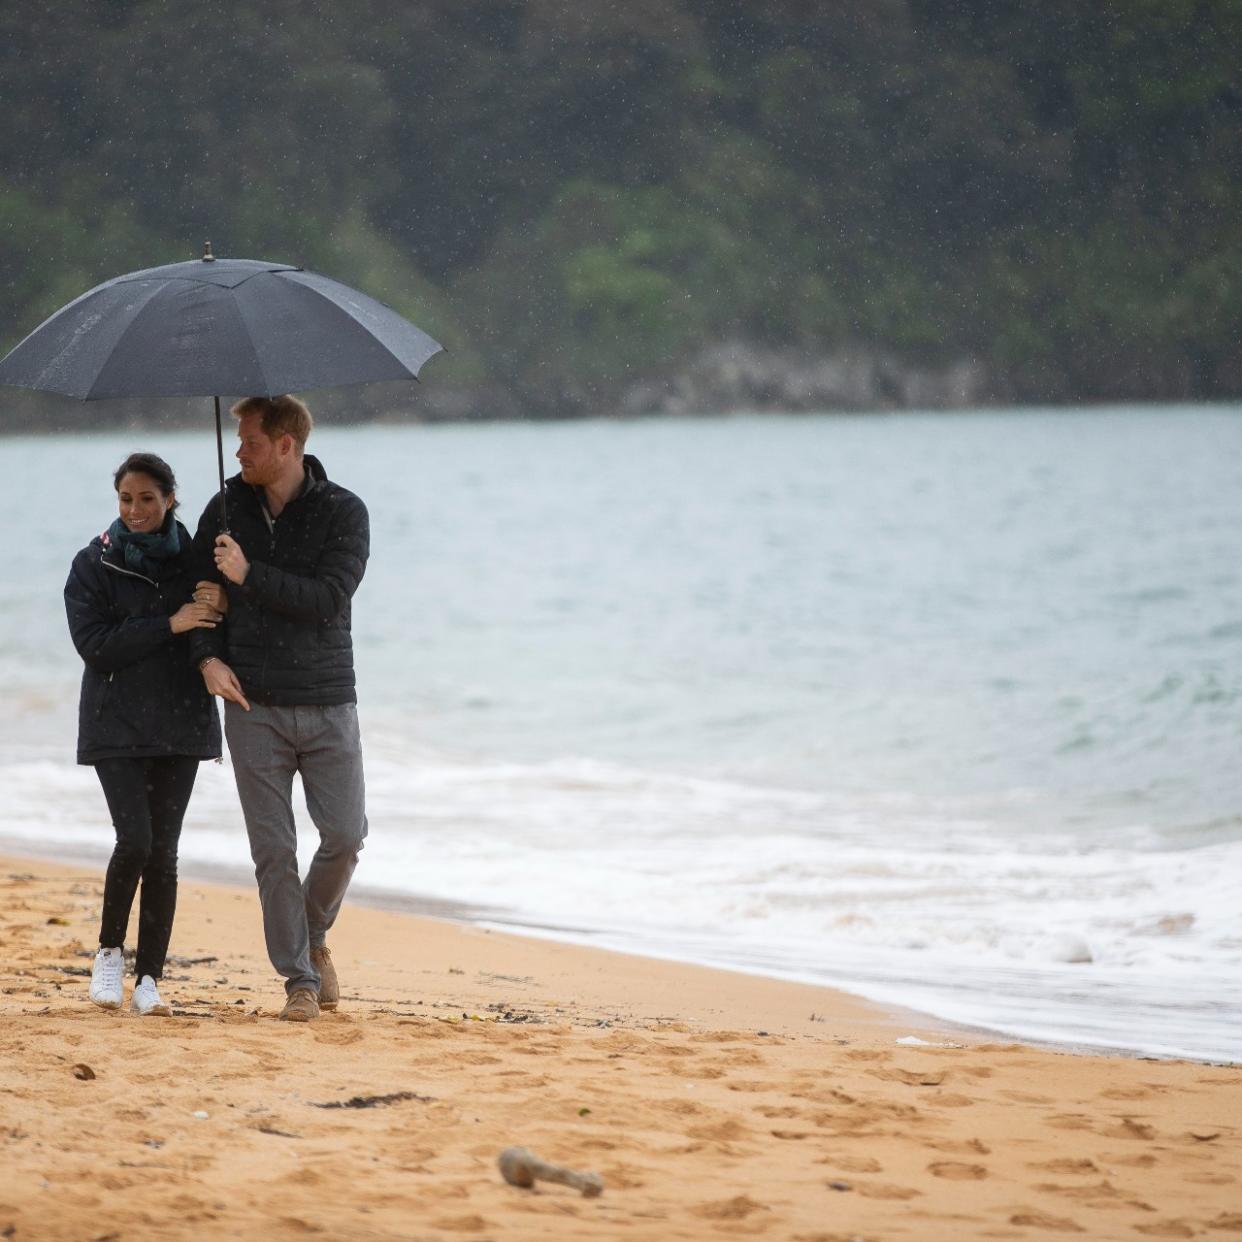  Prince Harry and Meghan Markle walking on the beach 